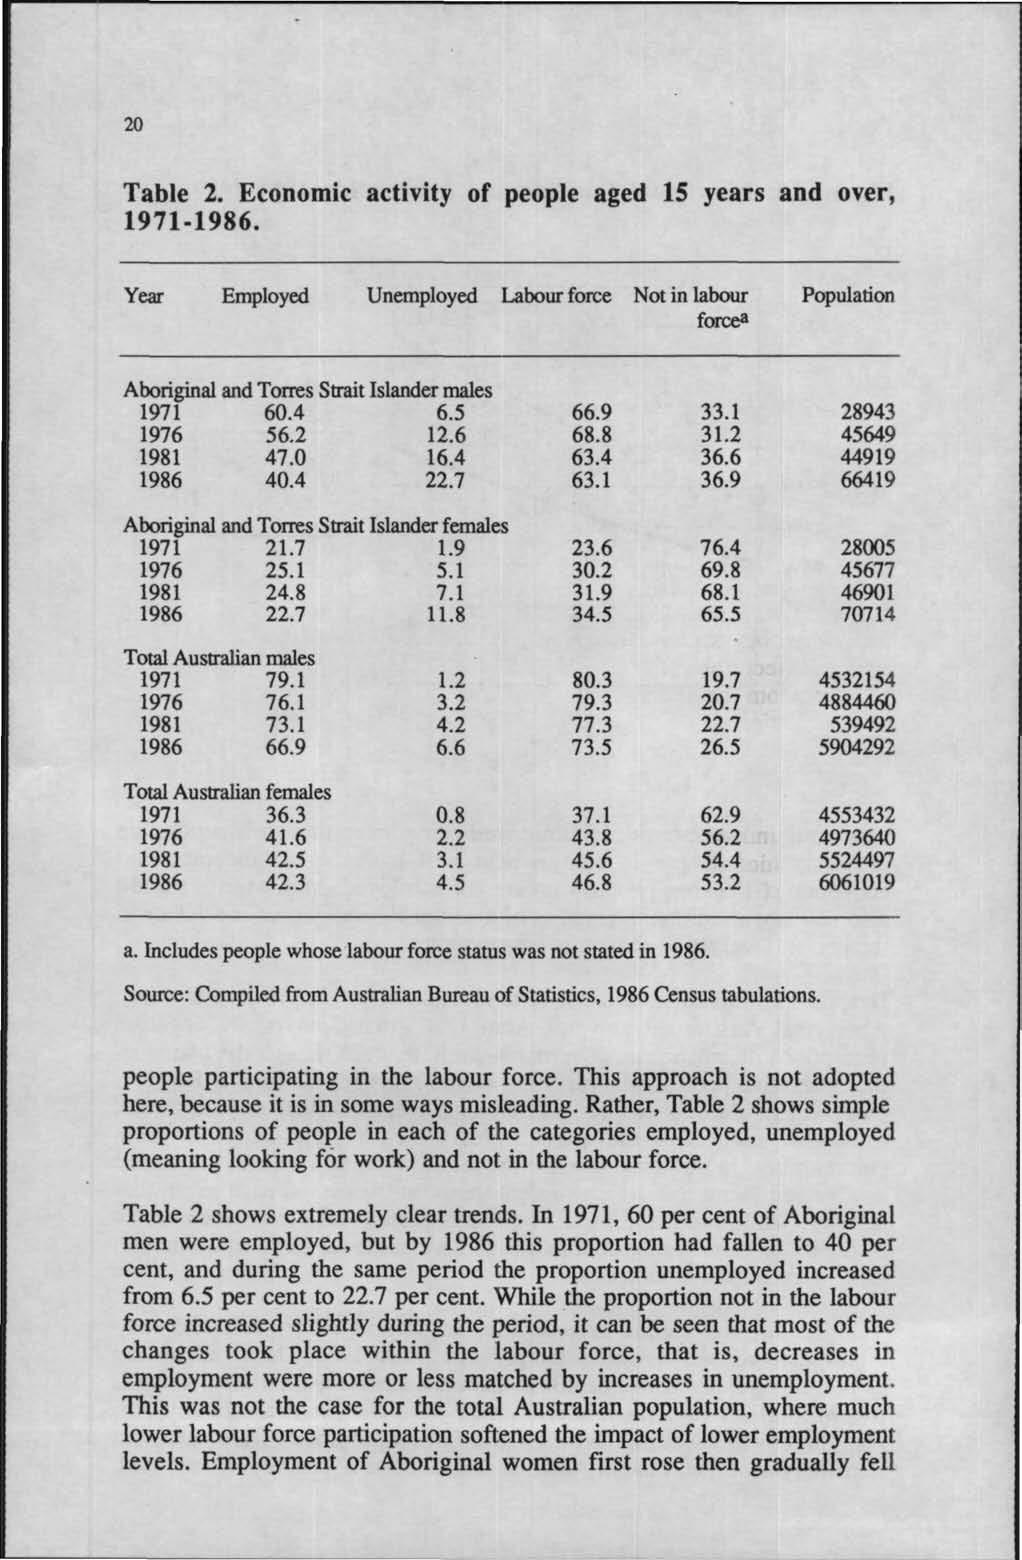 20 Table 2. Economic activity of people aged 15 years and over, 1971-1986. Year Employed Unemployed Labour force Not in labour Population forcea Aboriginal and Torres Strait Islander males 1971 60.